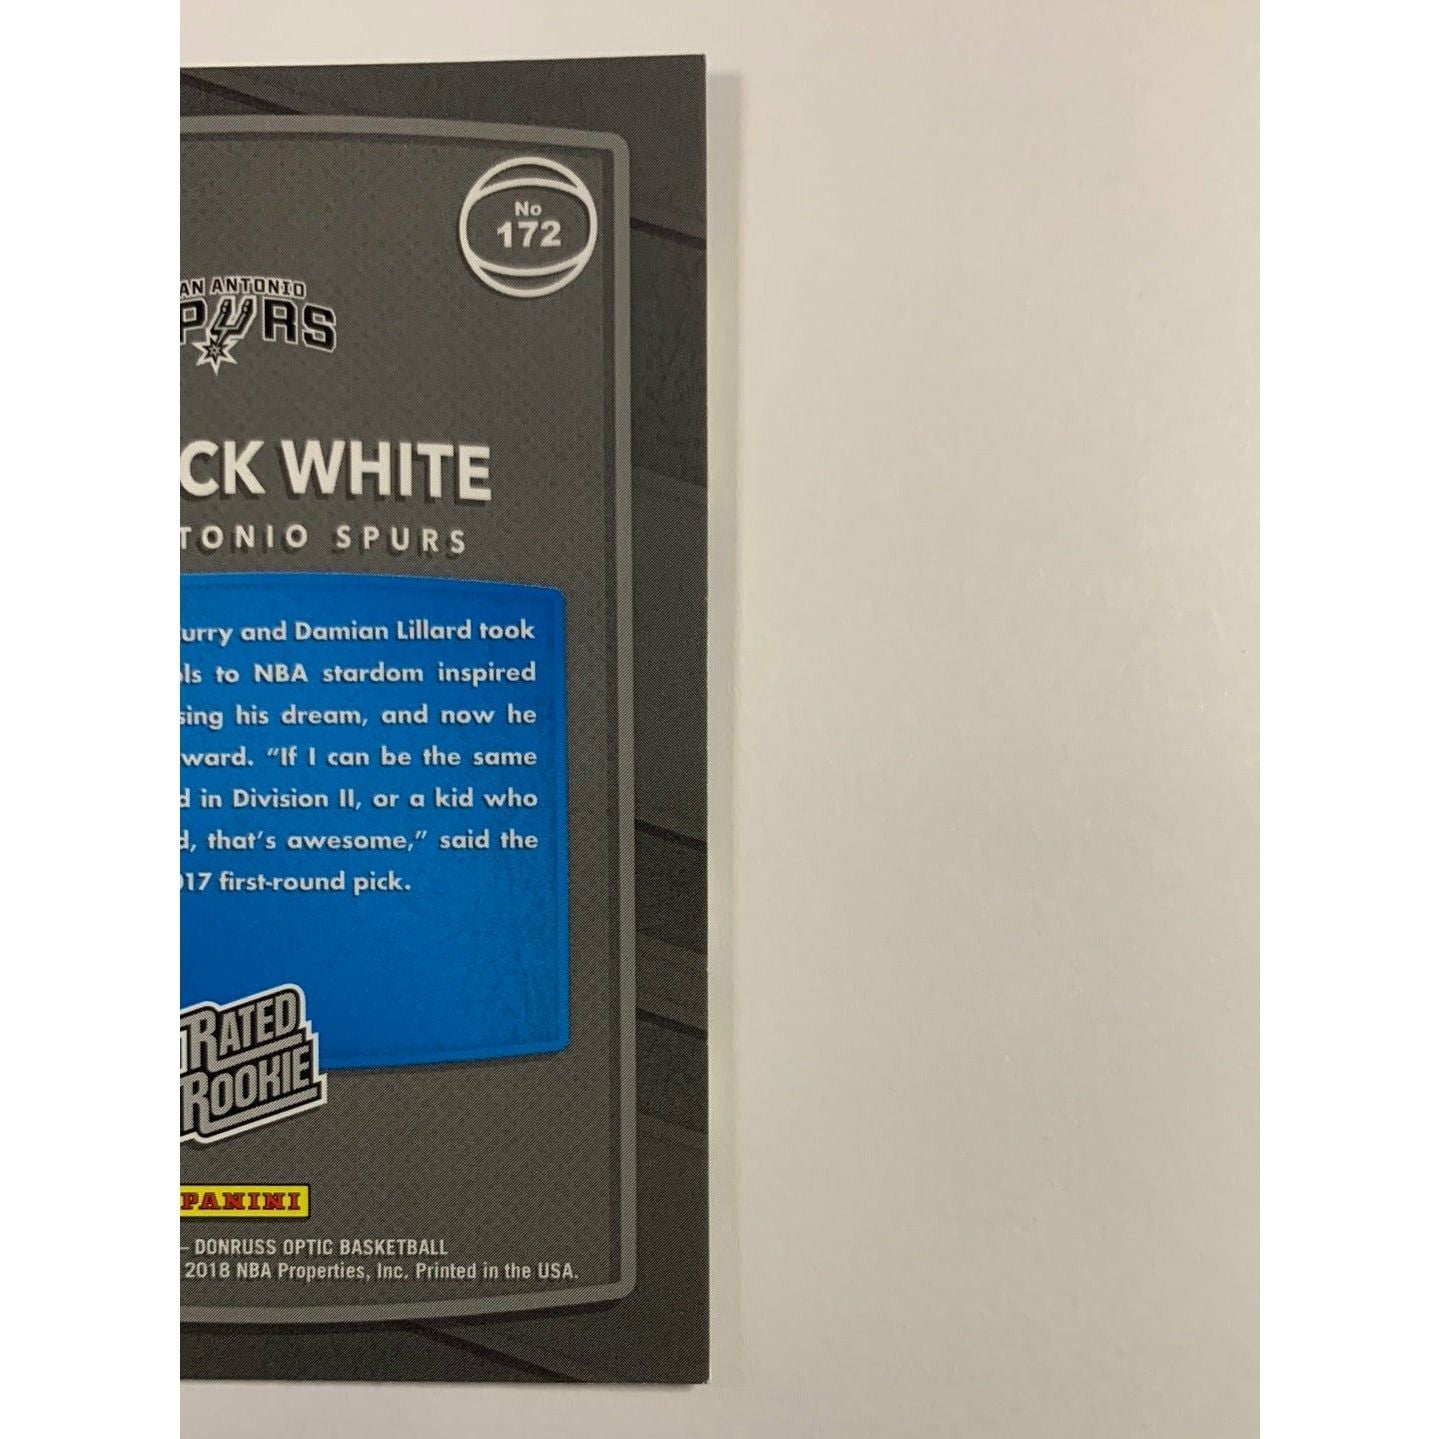 2017-18 Donruss Optic Derrick White Rated Rookie